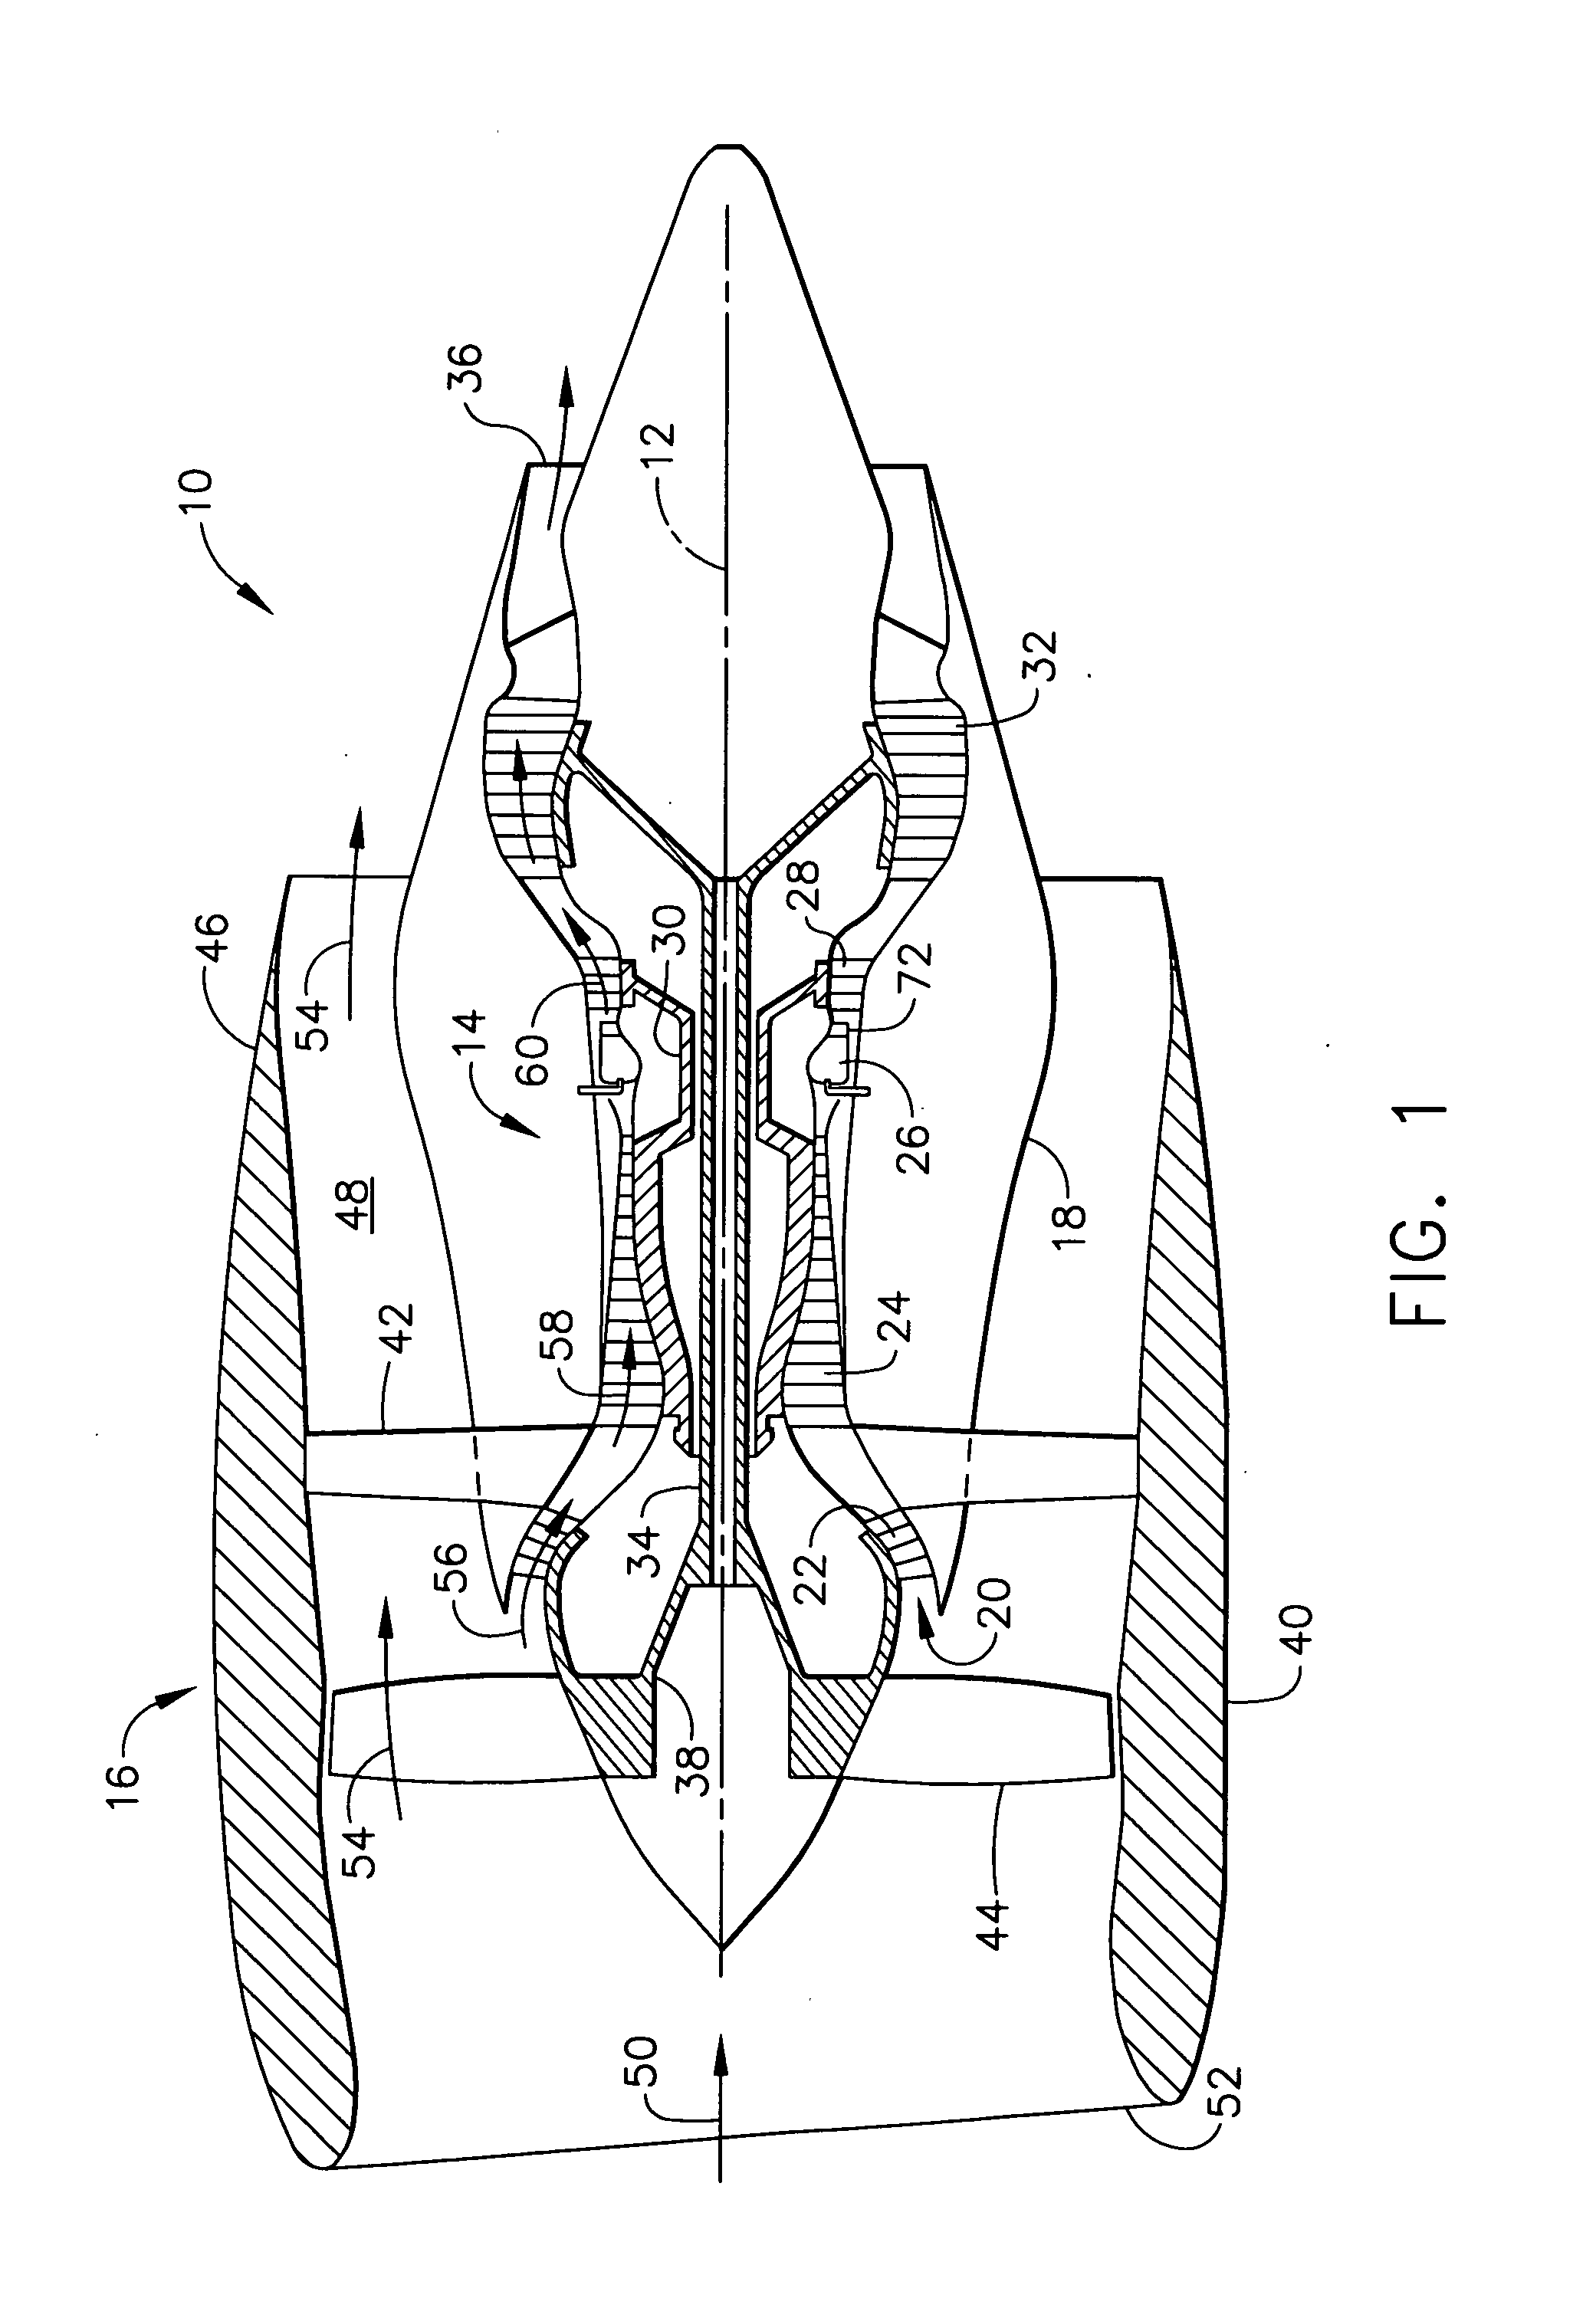 Method and apparatus for actively controlling fuel flow to a mixer assembly of a gas turbine engine combustor